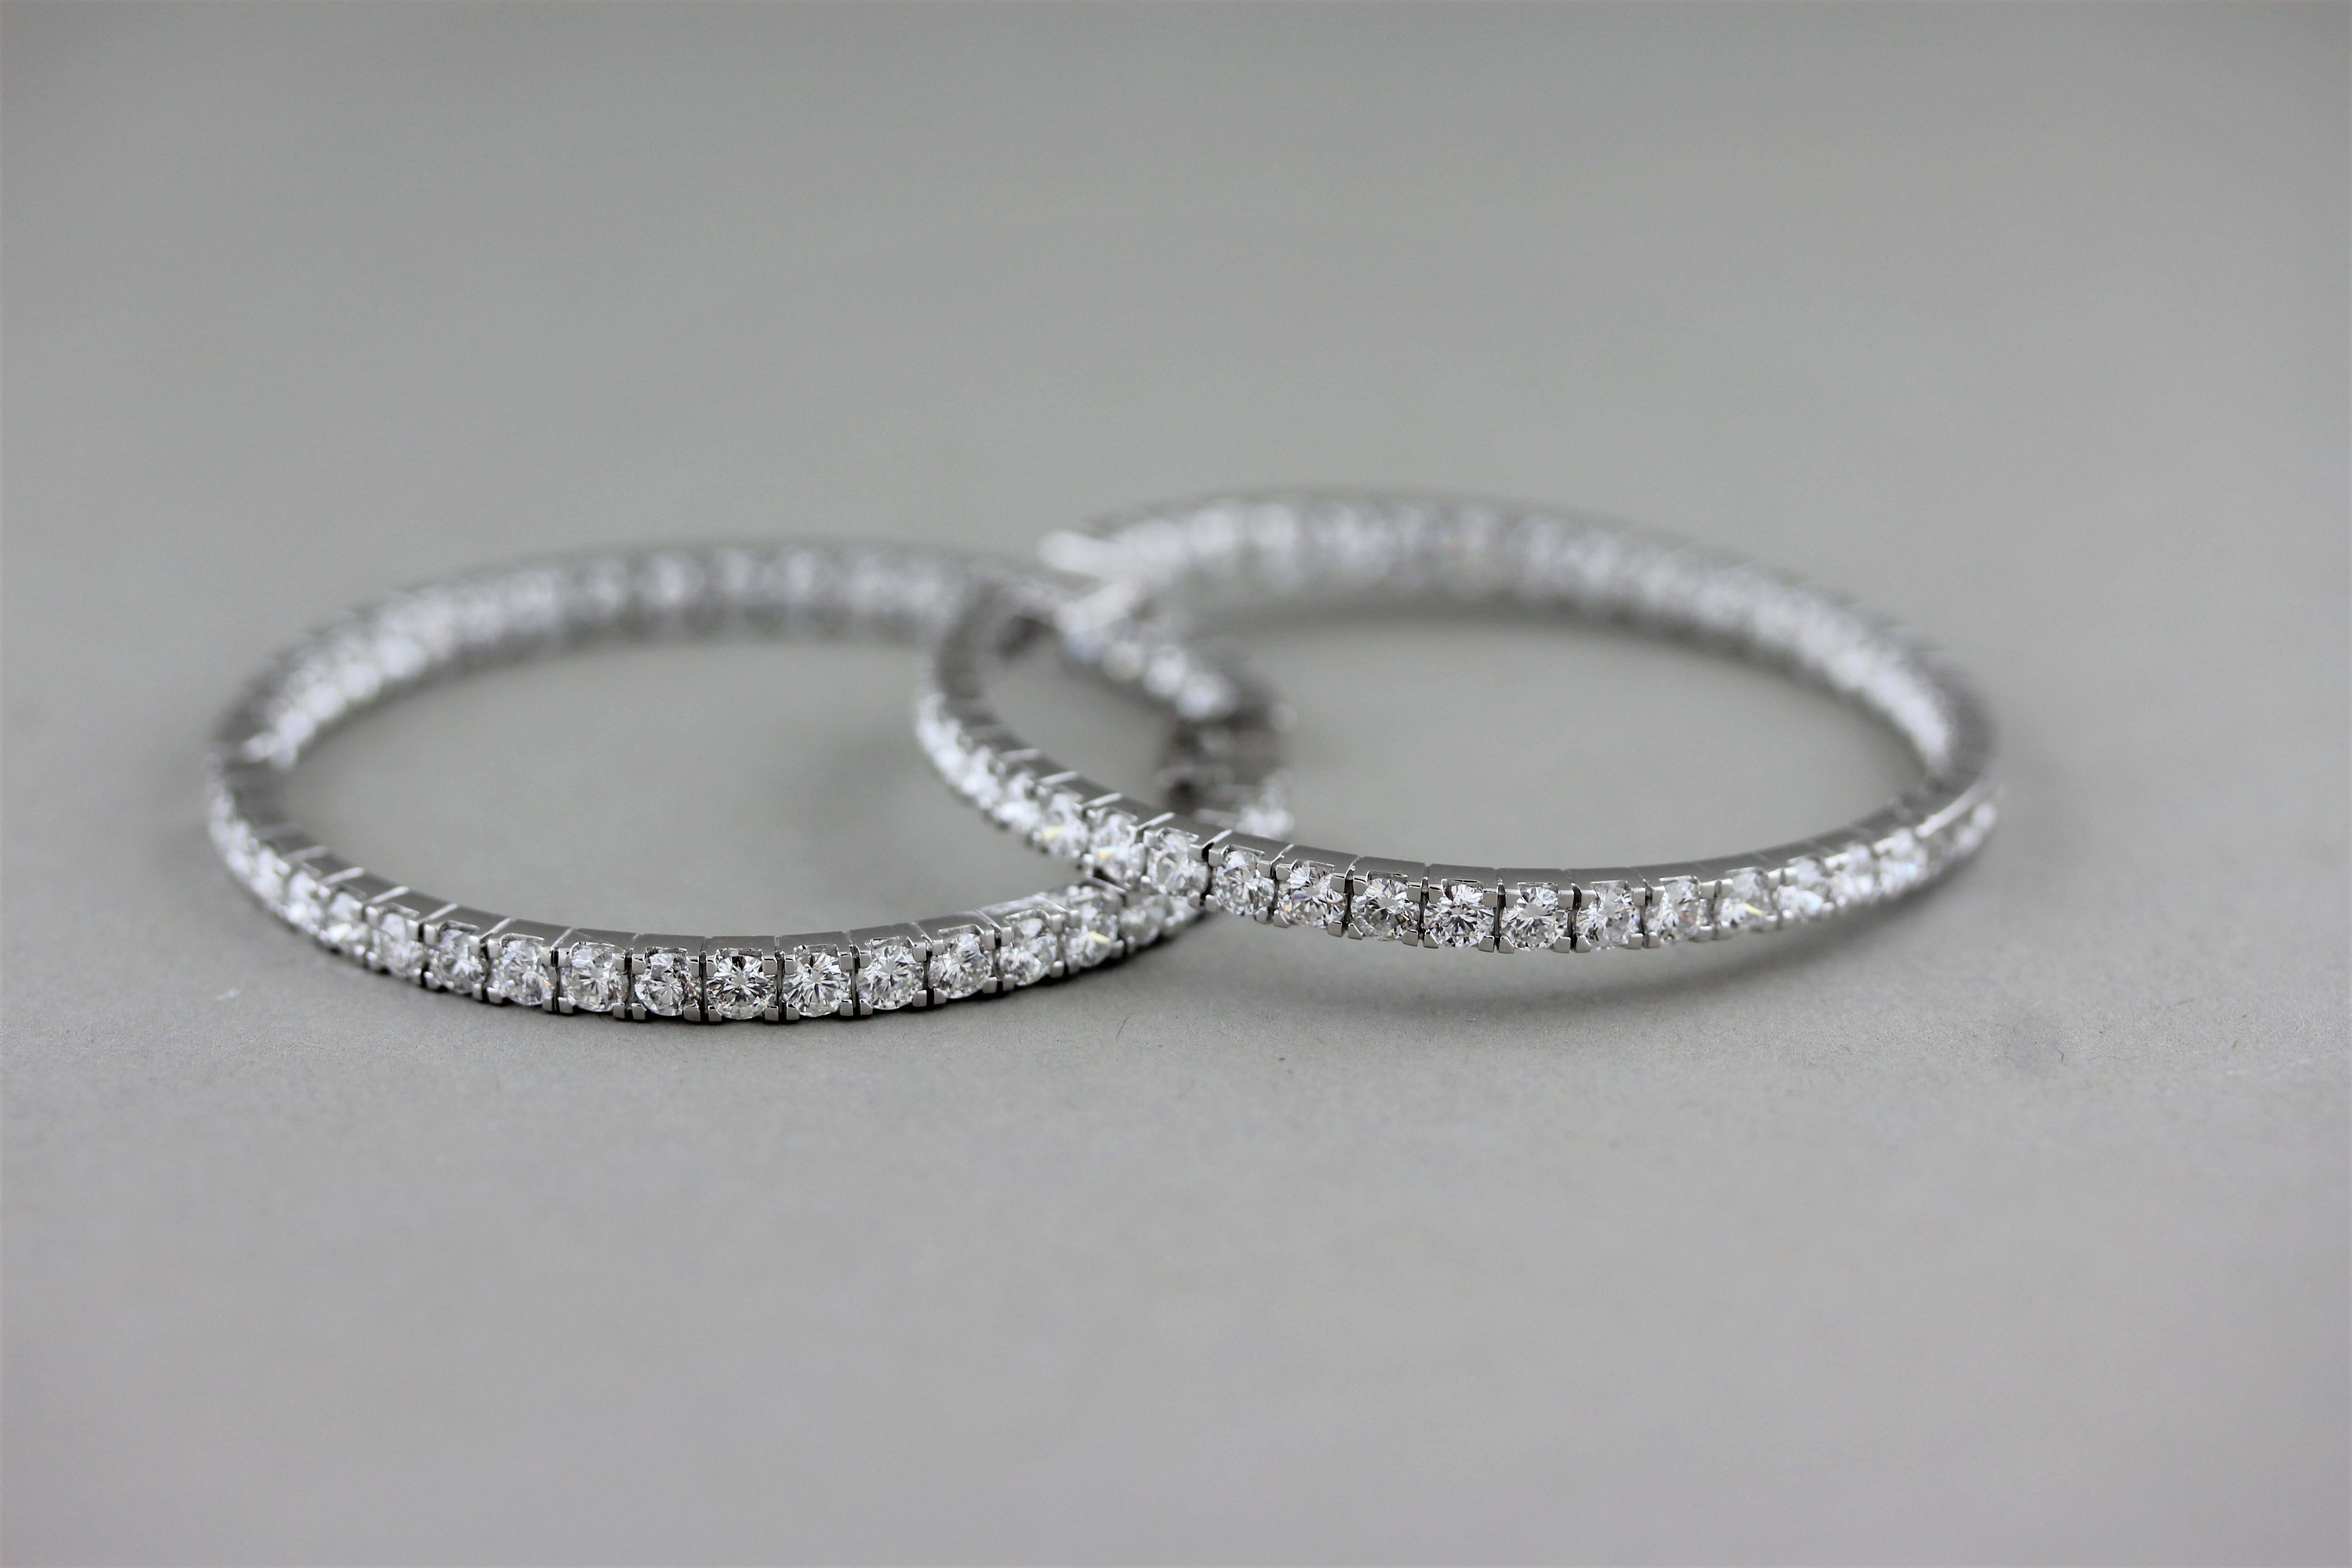 A large pair of classic inside-out hoop earrings. They are set with 5.70 carats of round brilliant cut diamonds on the inside and out giving the piece the illusion of diamonds set all around them. Made in 18k white gold these can be worn in the day